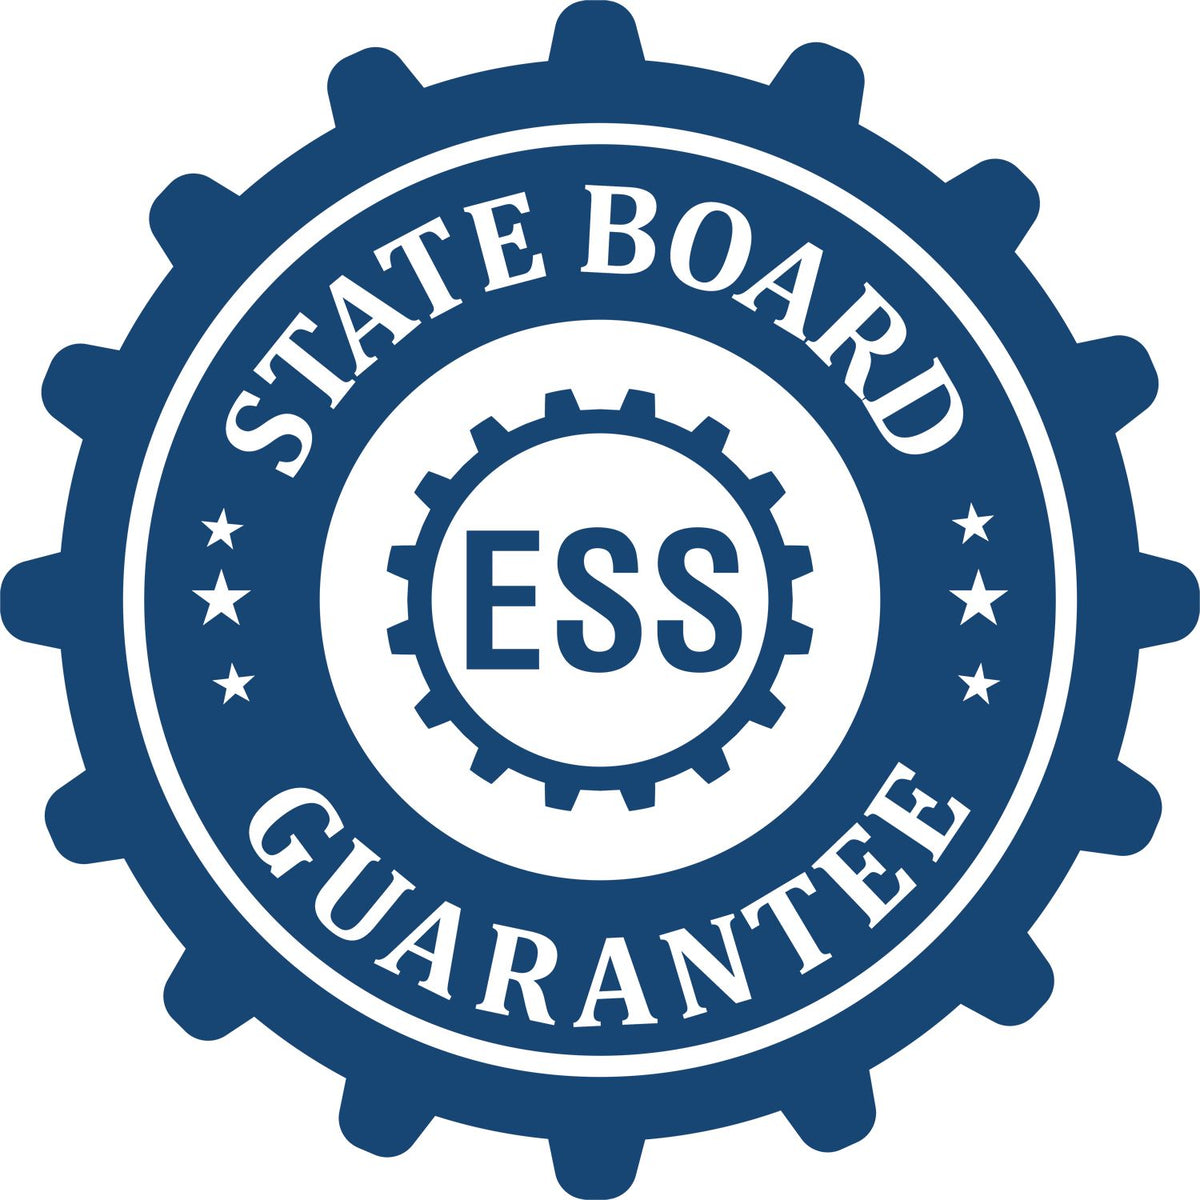 An emblem in a gear shape illustrating a state board guarantee for the Hybrid South Dakota Engineer Seal